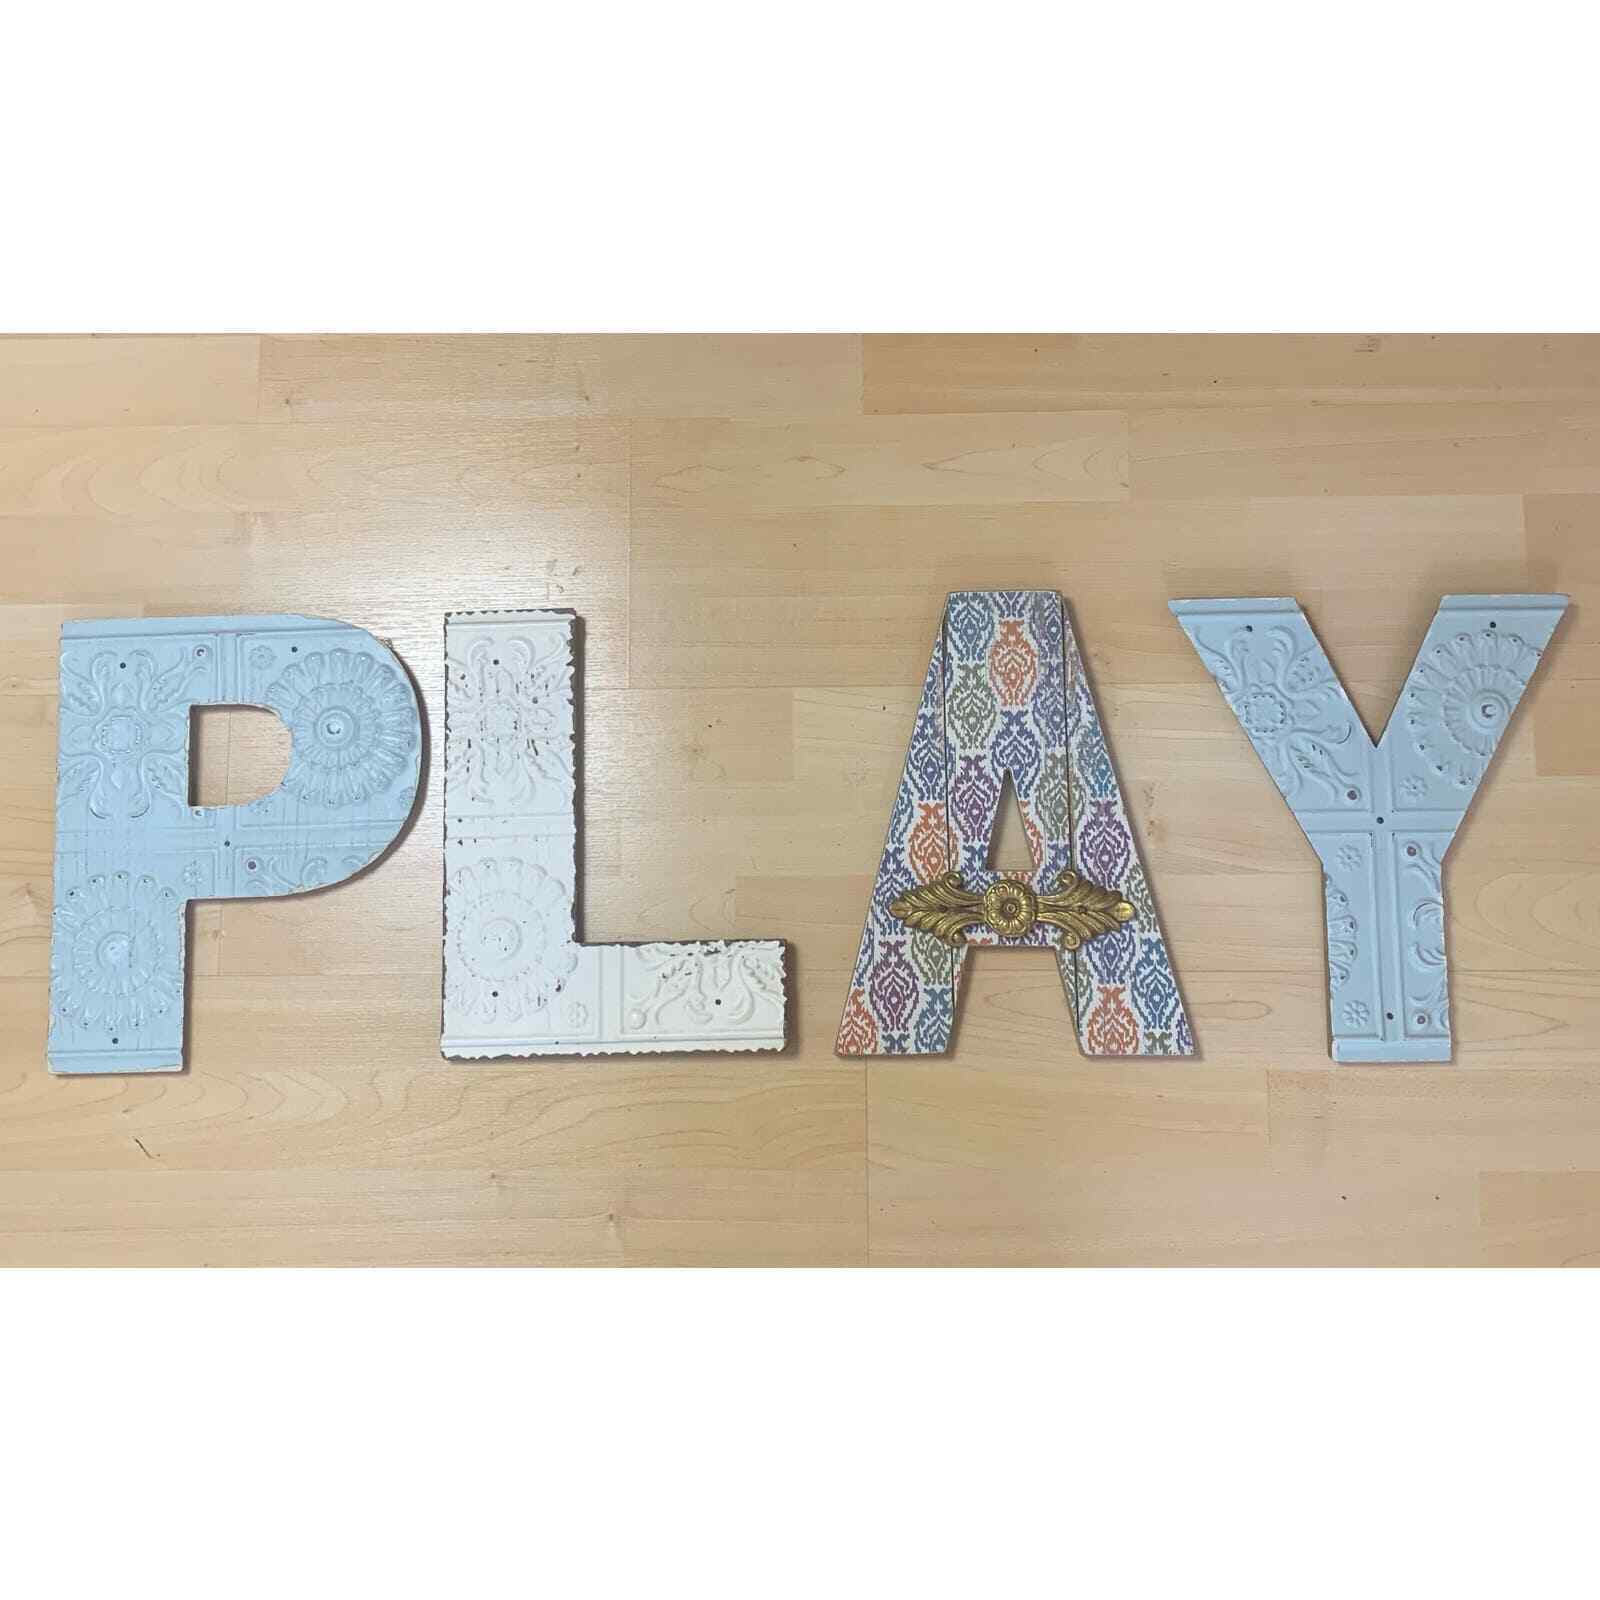 Studio Decor Sophie Alphabet Decor Kids Room Colorful PLAY Wooden Wall Letters  